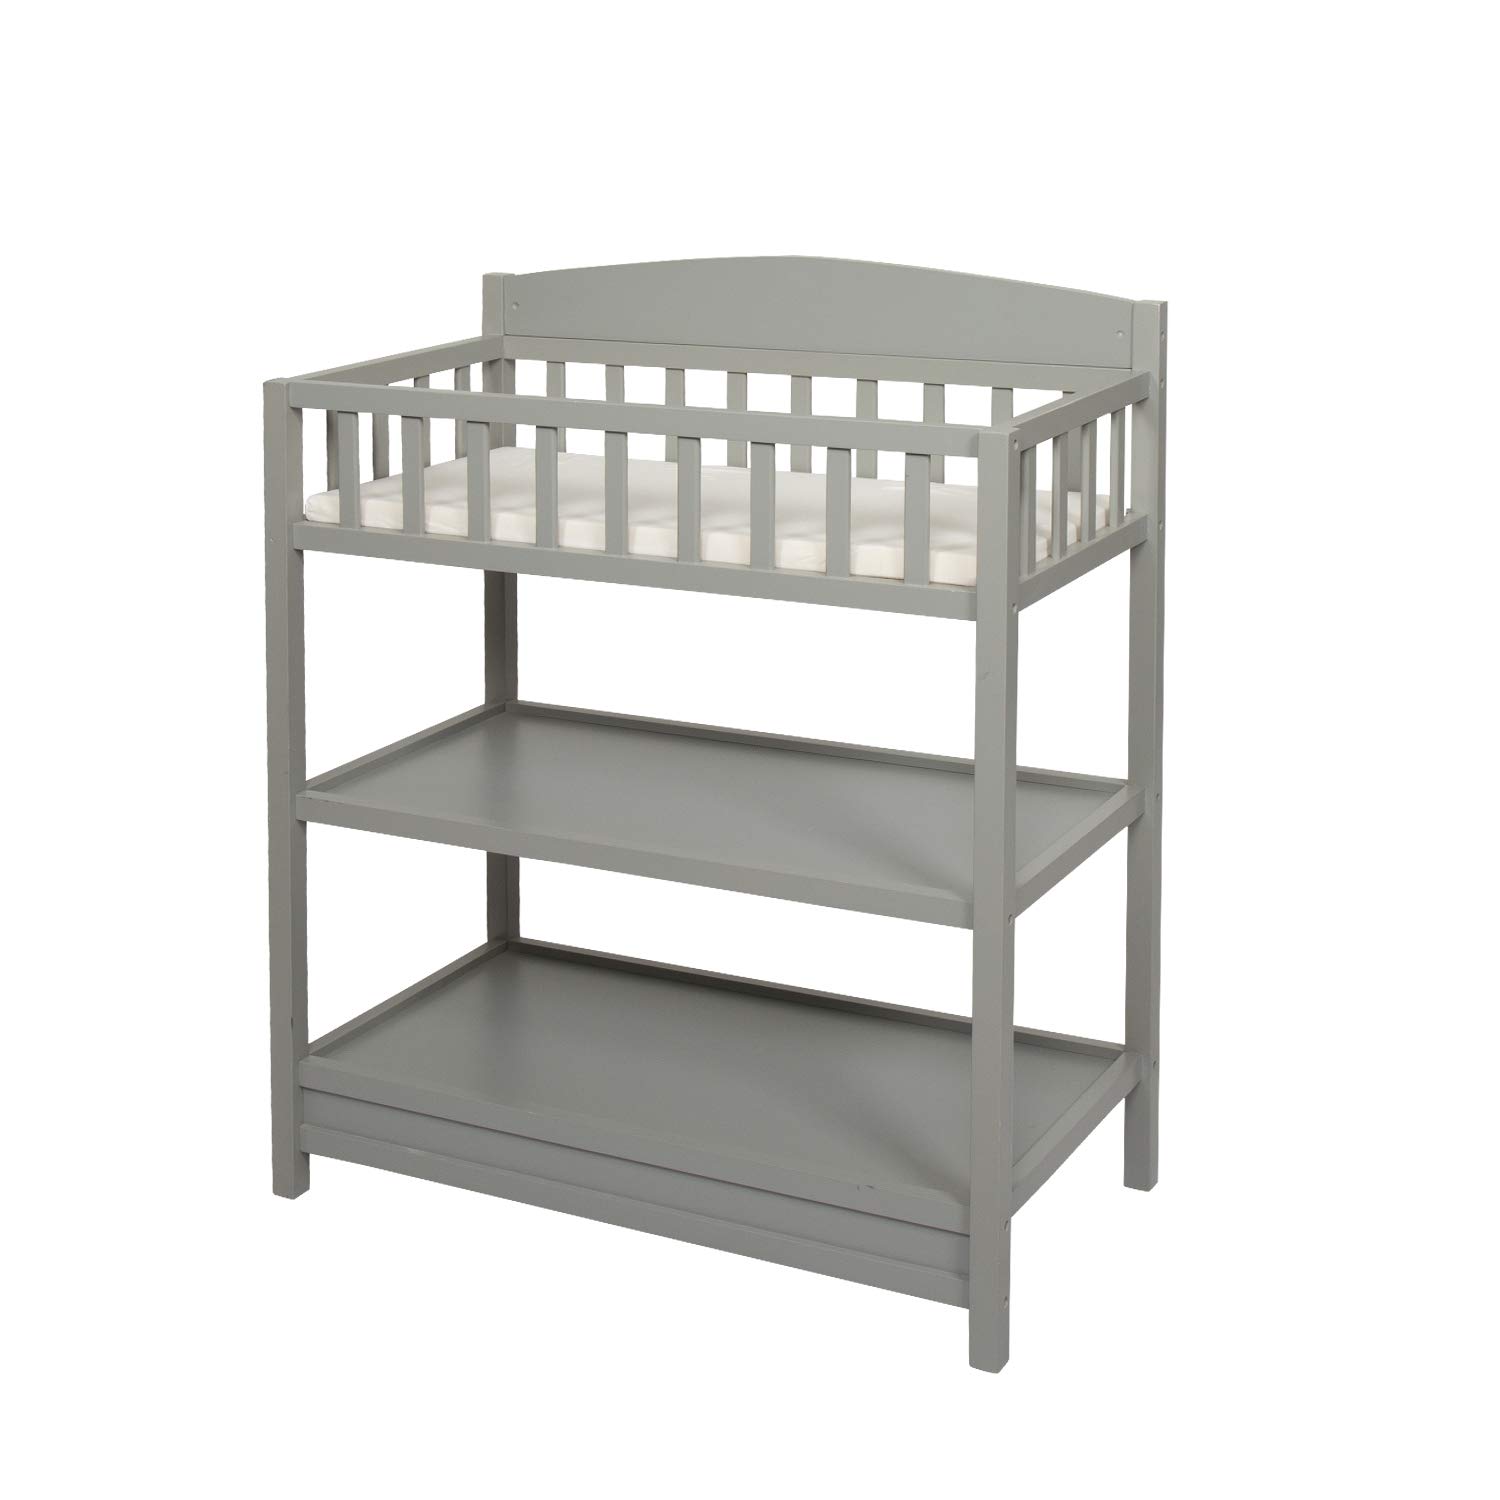 Grey Include Changing Pad Baby Wooden Changing Table with Storage Shelves